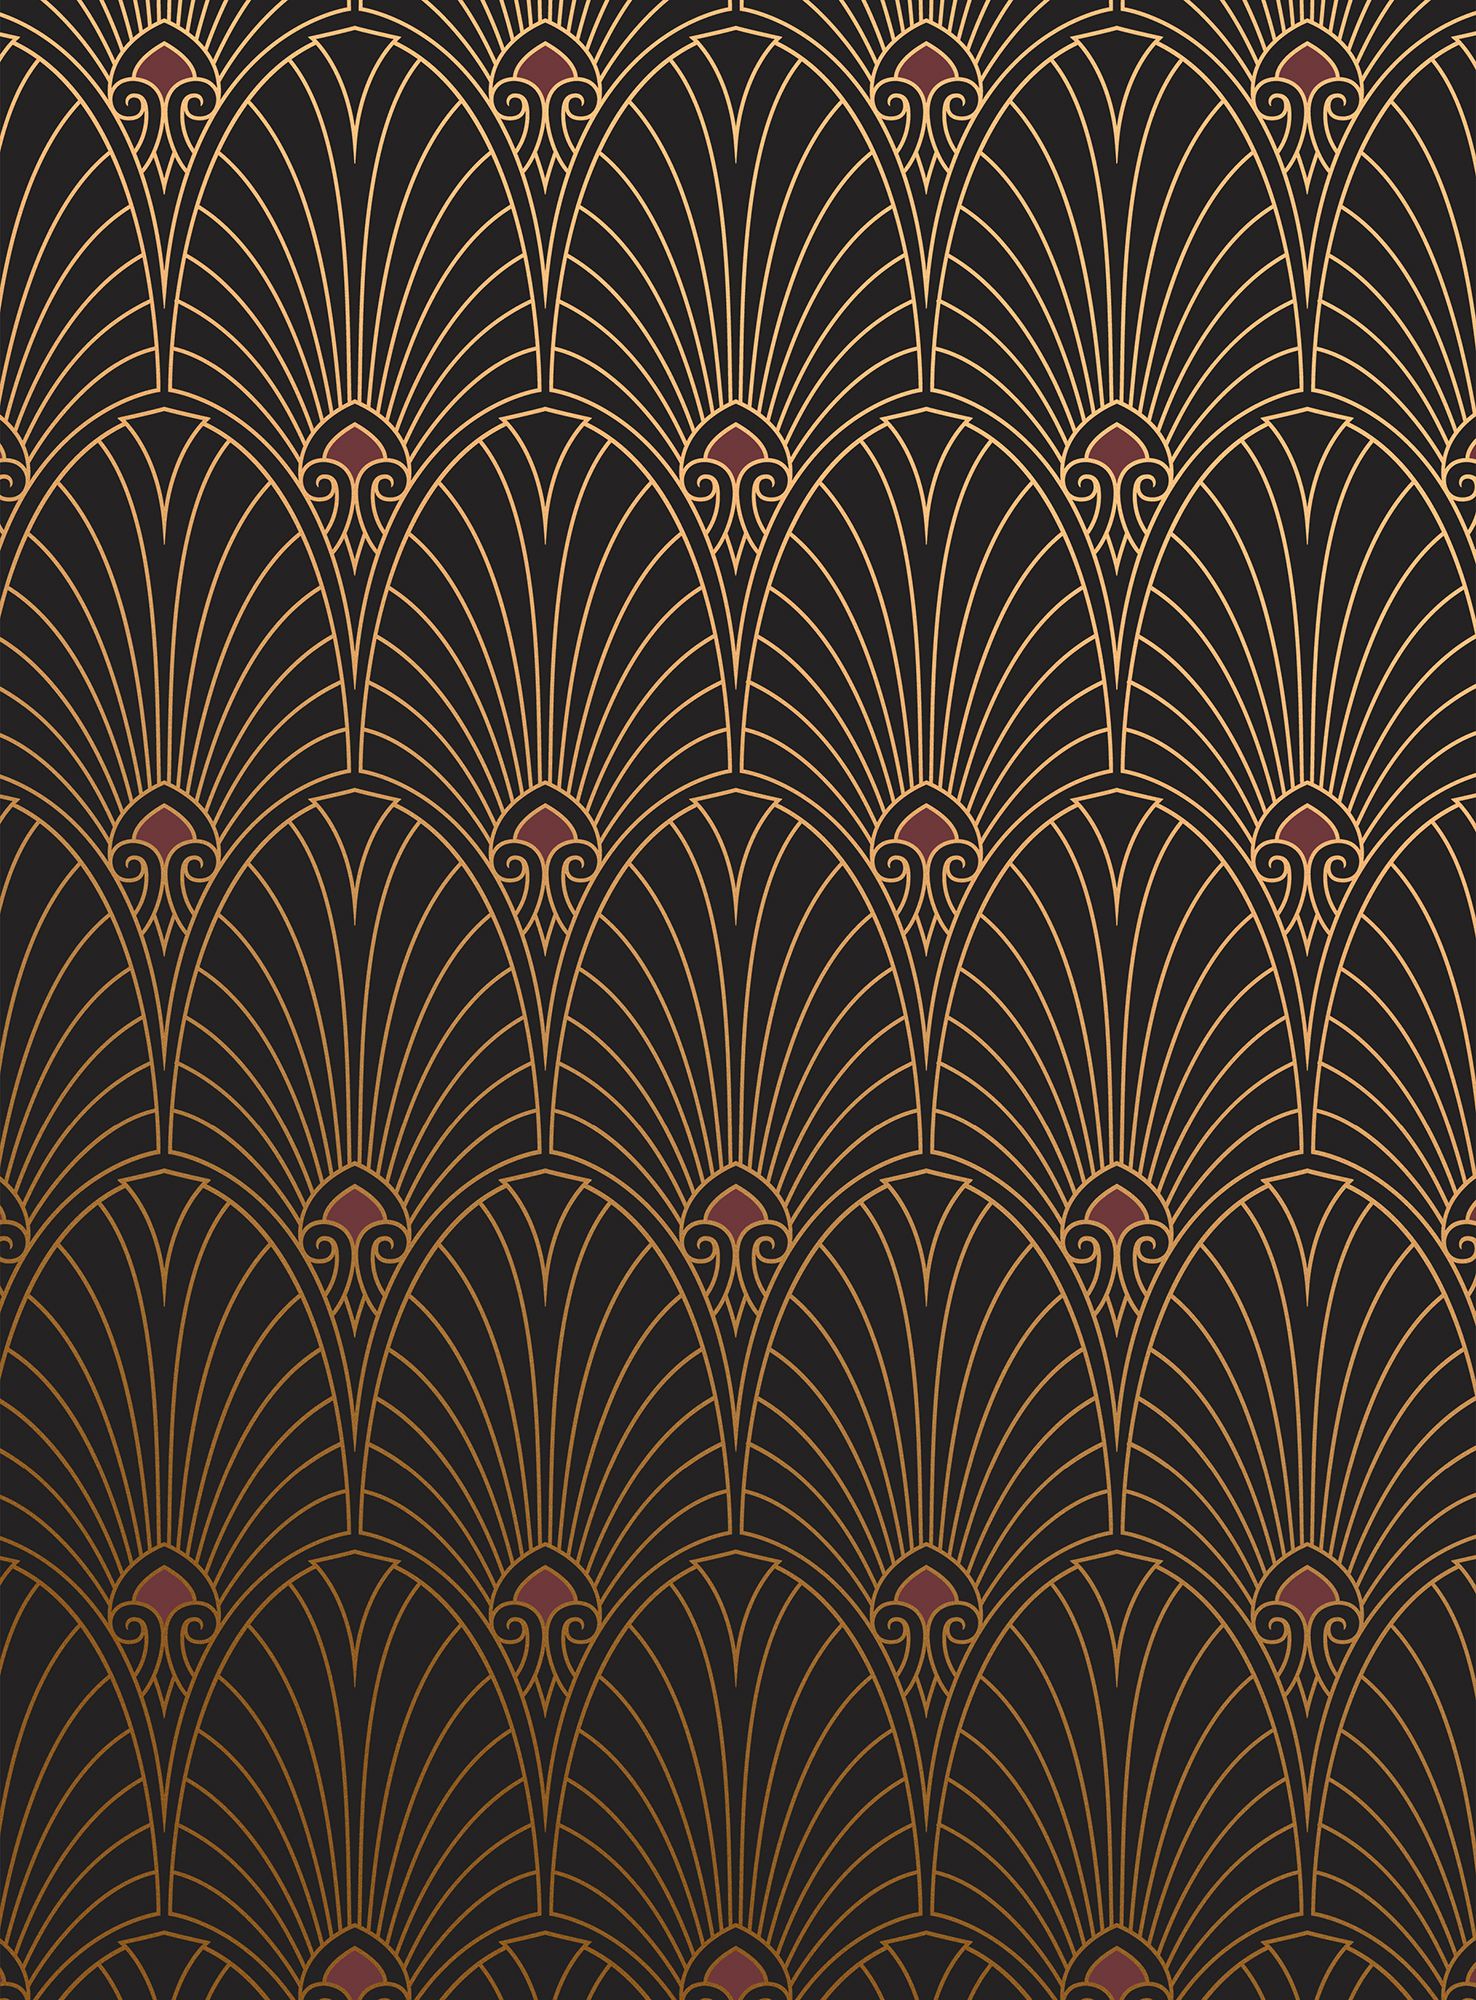 1920s Fabric, Wallpaper and Home Decor | Spoonflower